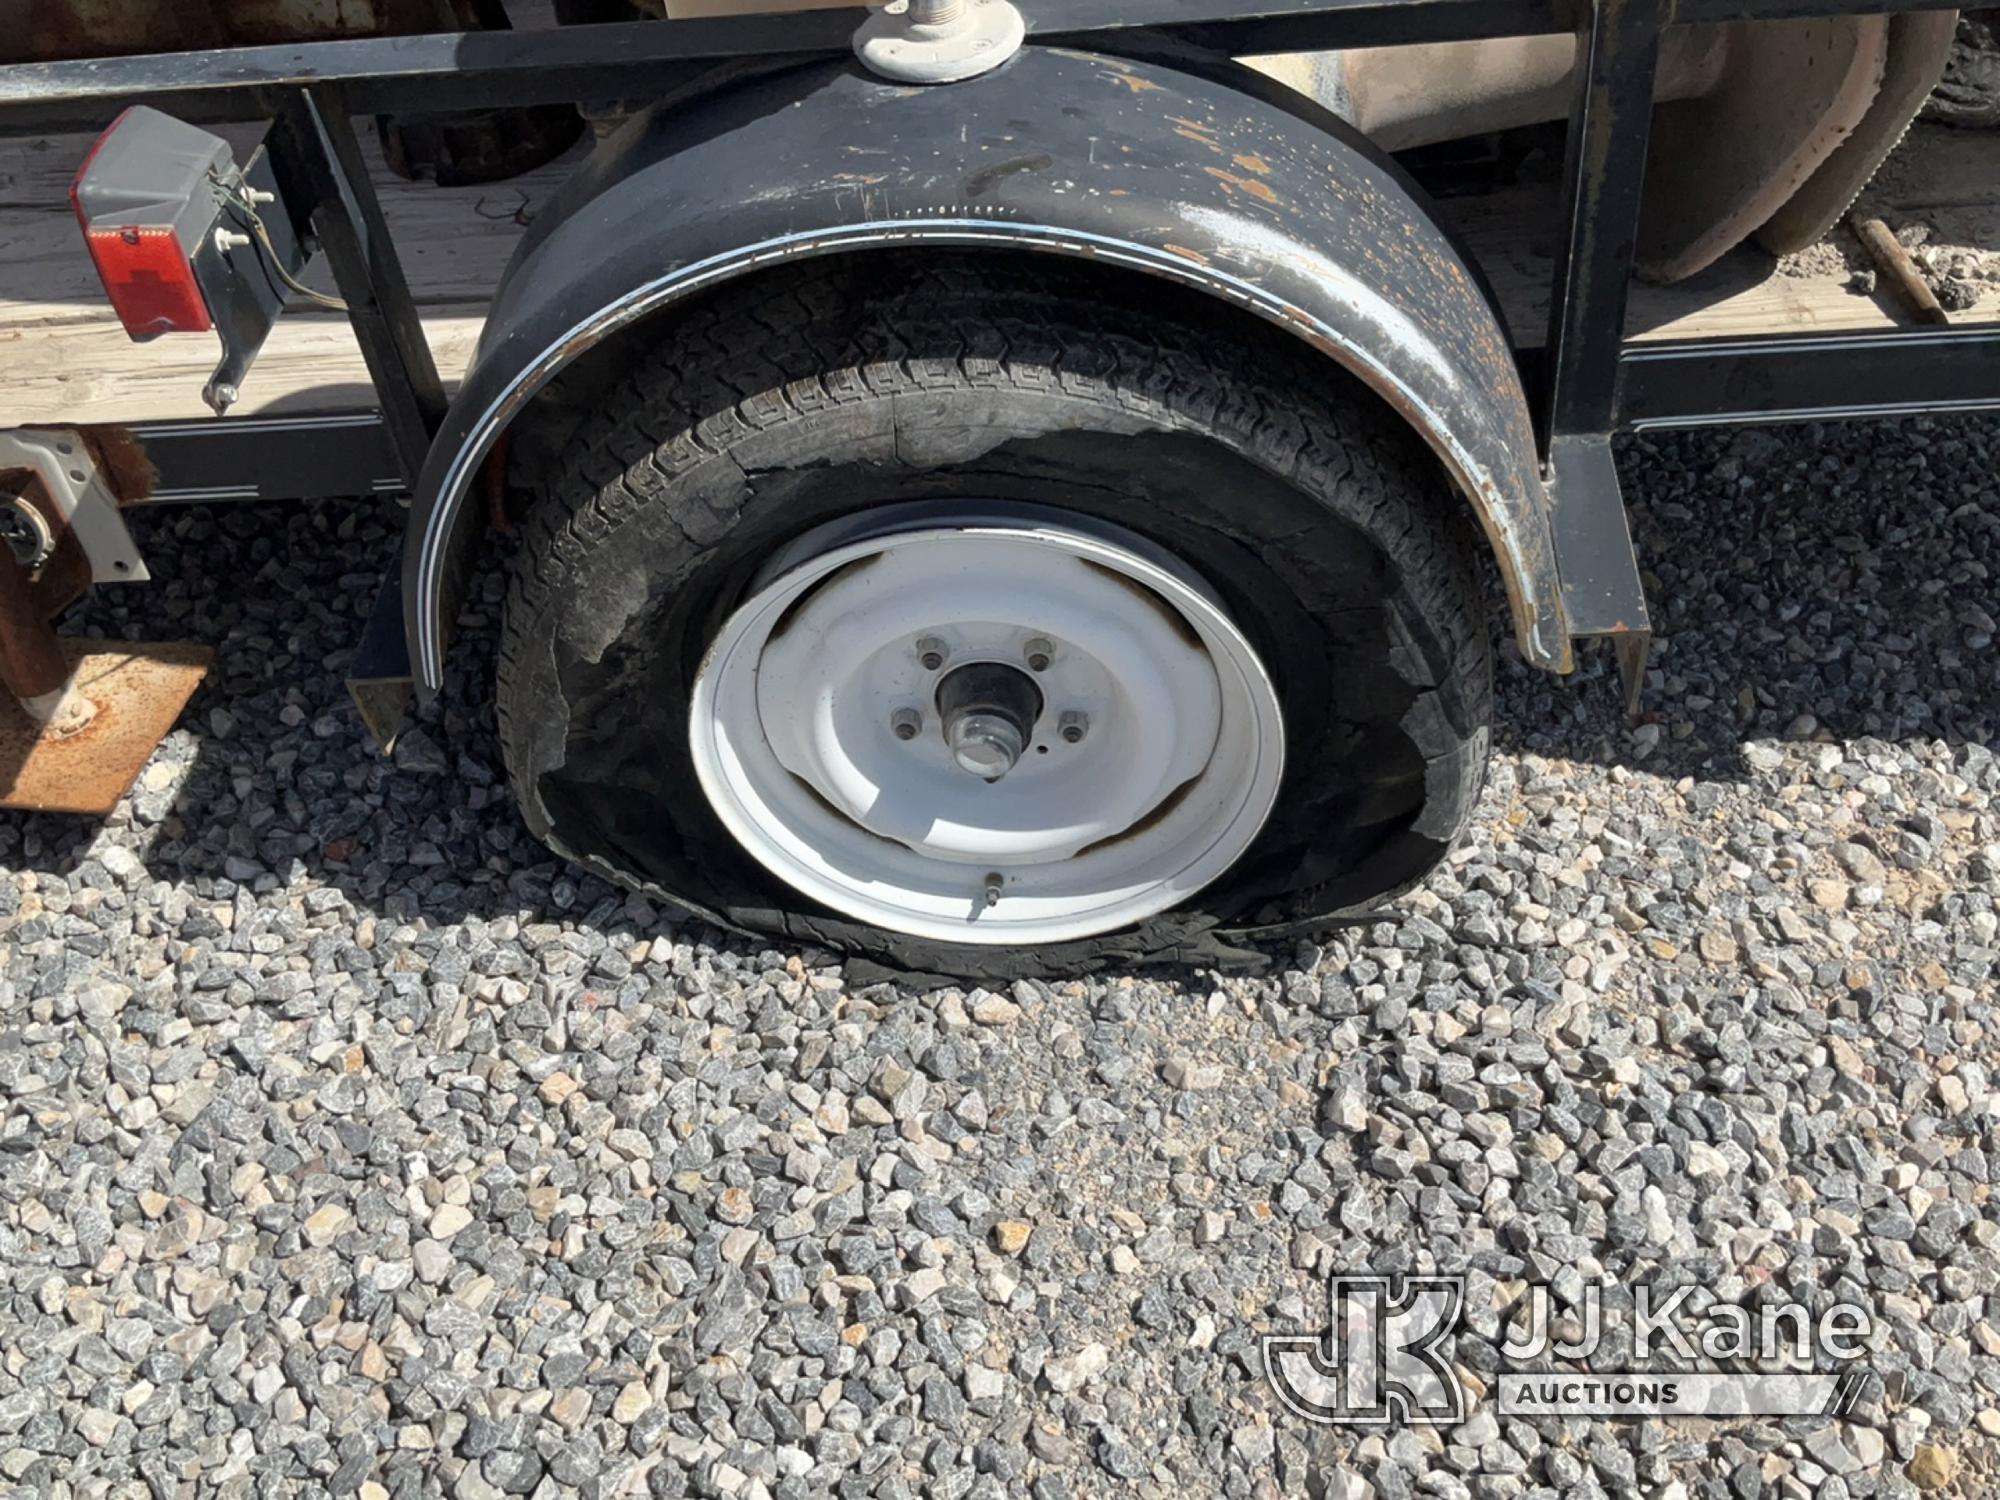 (Las Vegas, NV) 1994 Big Tex Flatbed Trailer 2 In. Ball, Deck 8 Ft. 3 In. Long, 5 Ft. Wide Bad Tires